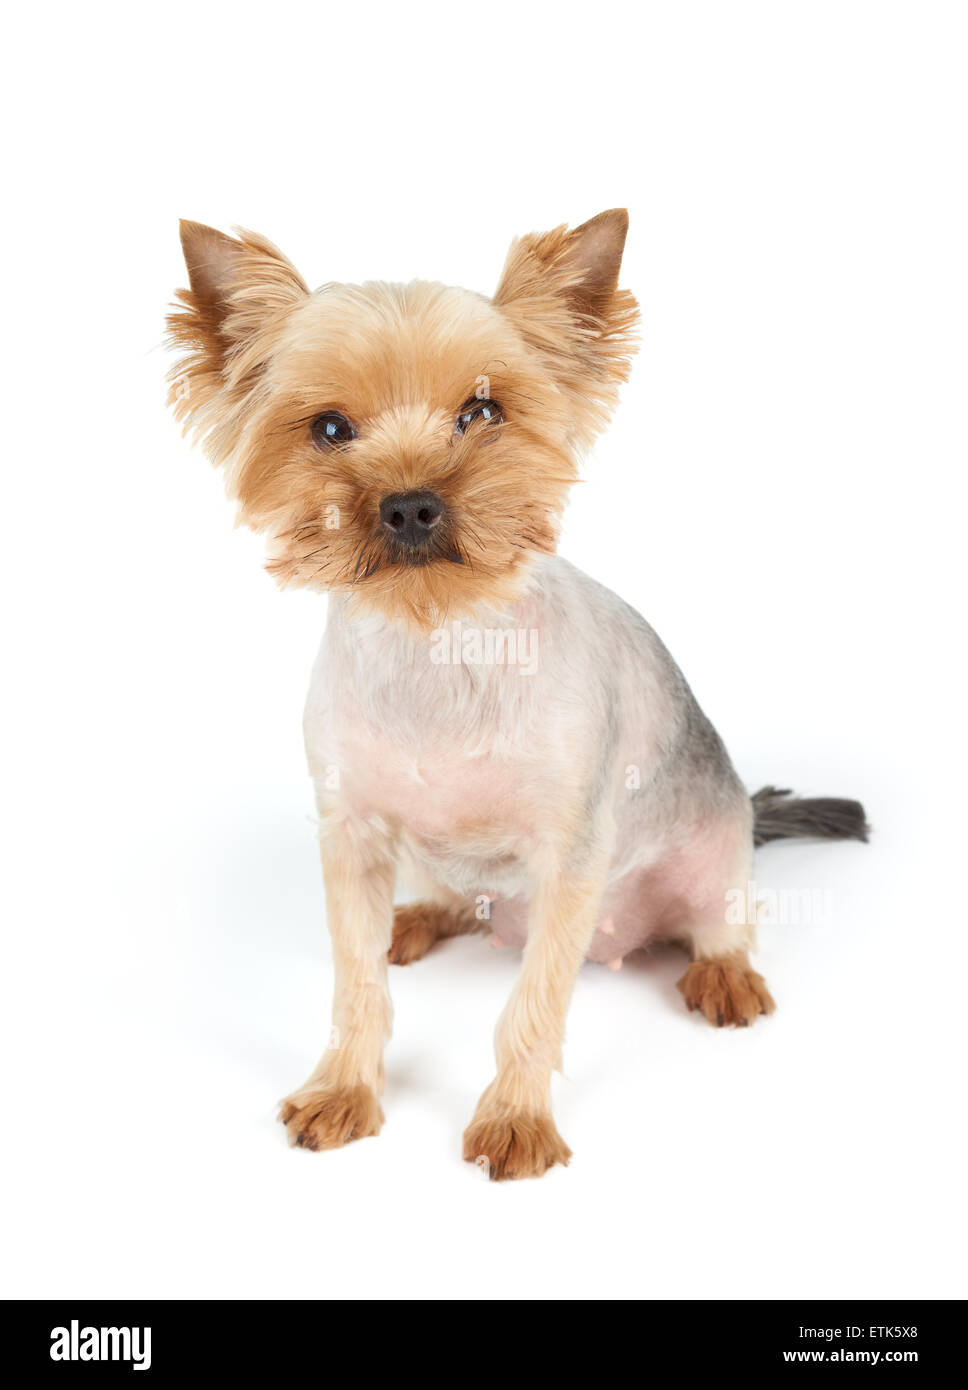 Yorkshire Terrier with short haircut and funny muzzle looks at the camera. It sits on white background. Stock Photo